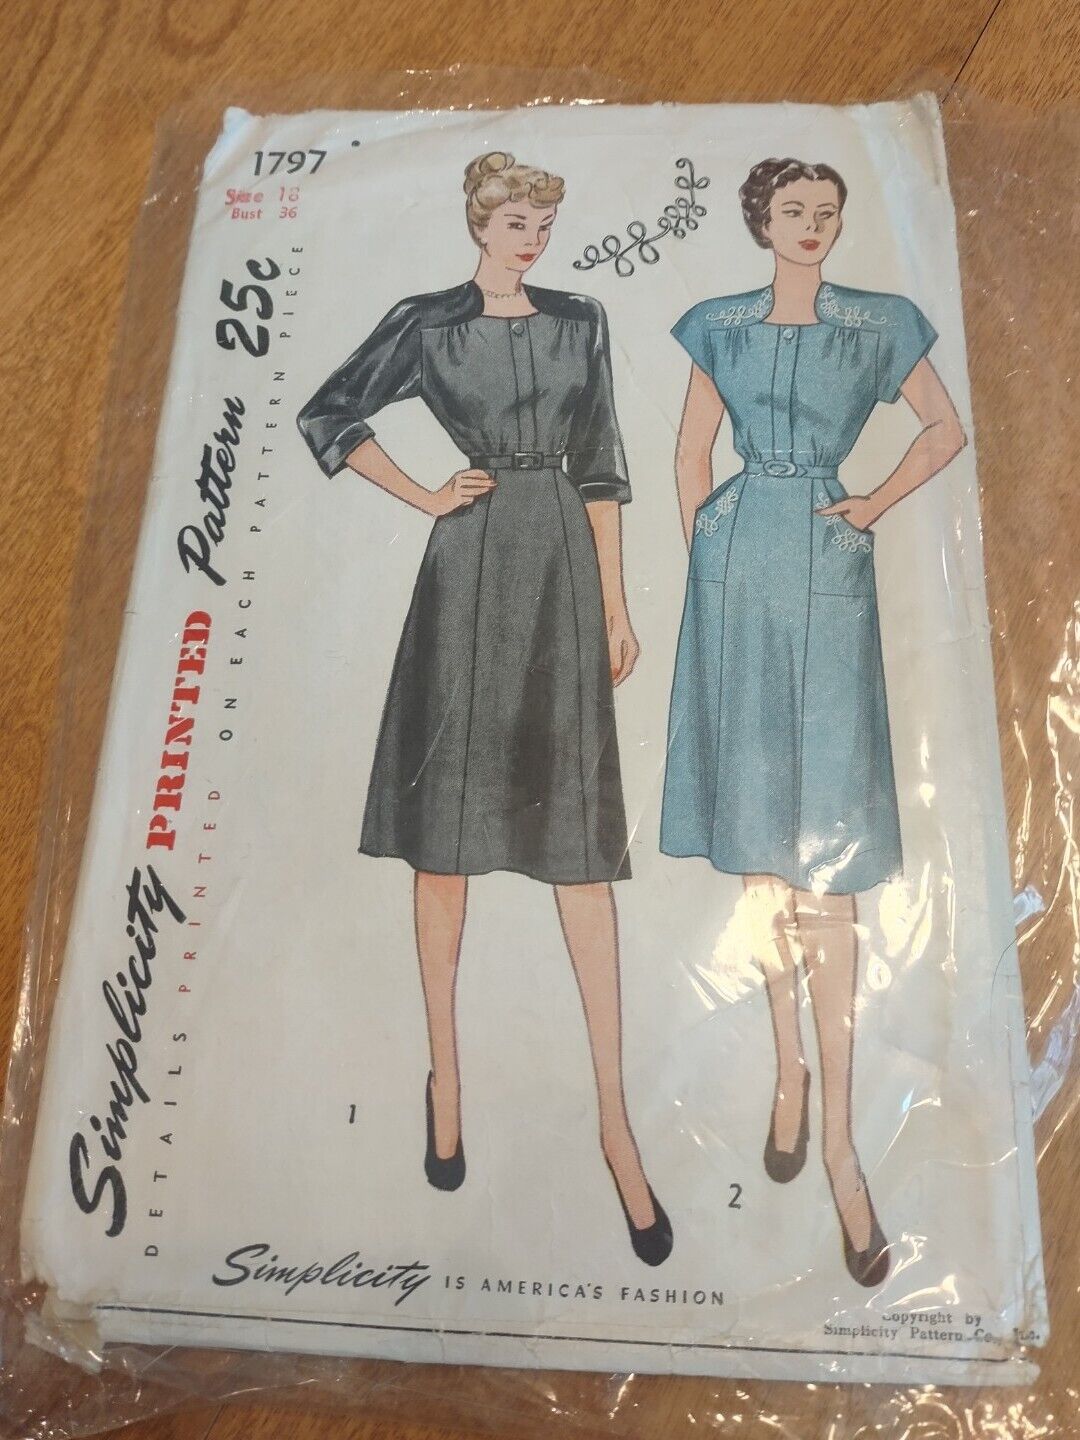 1940-50s Vintage Simplicity Sewing Pattern 1797 One Piece Dress Sz 18 Bust 36